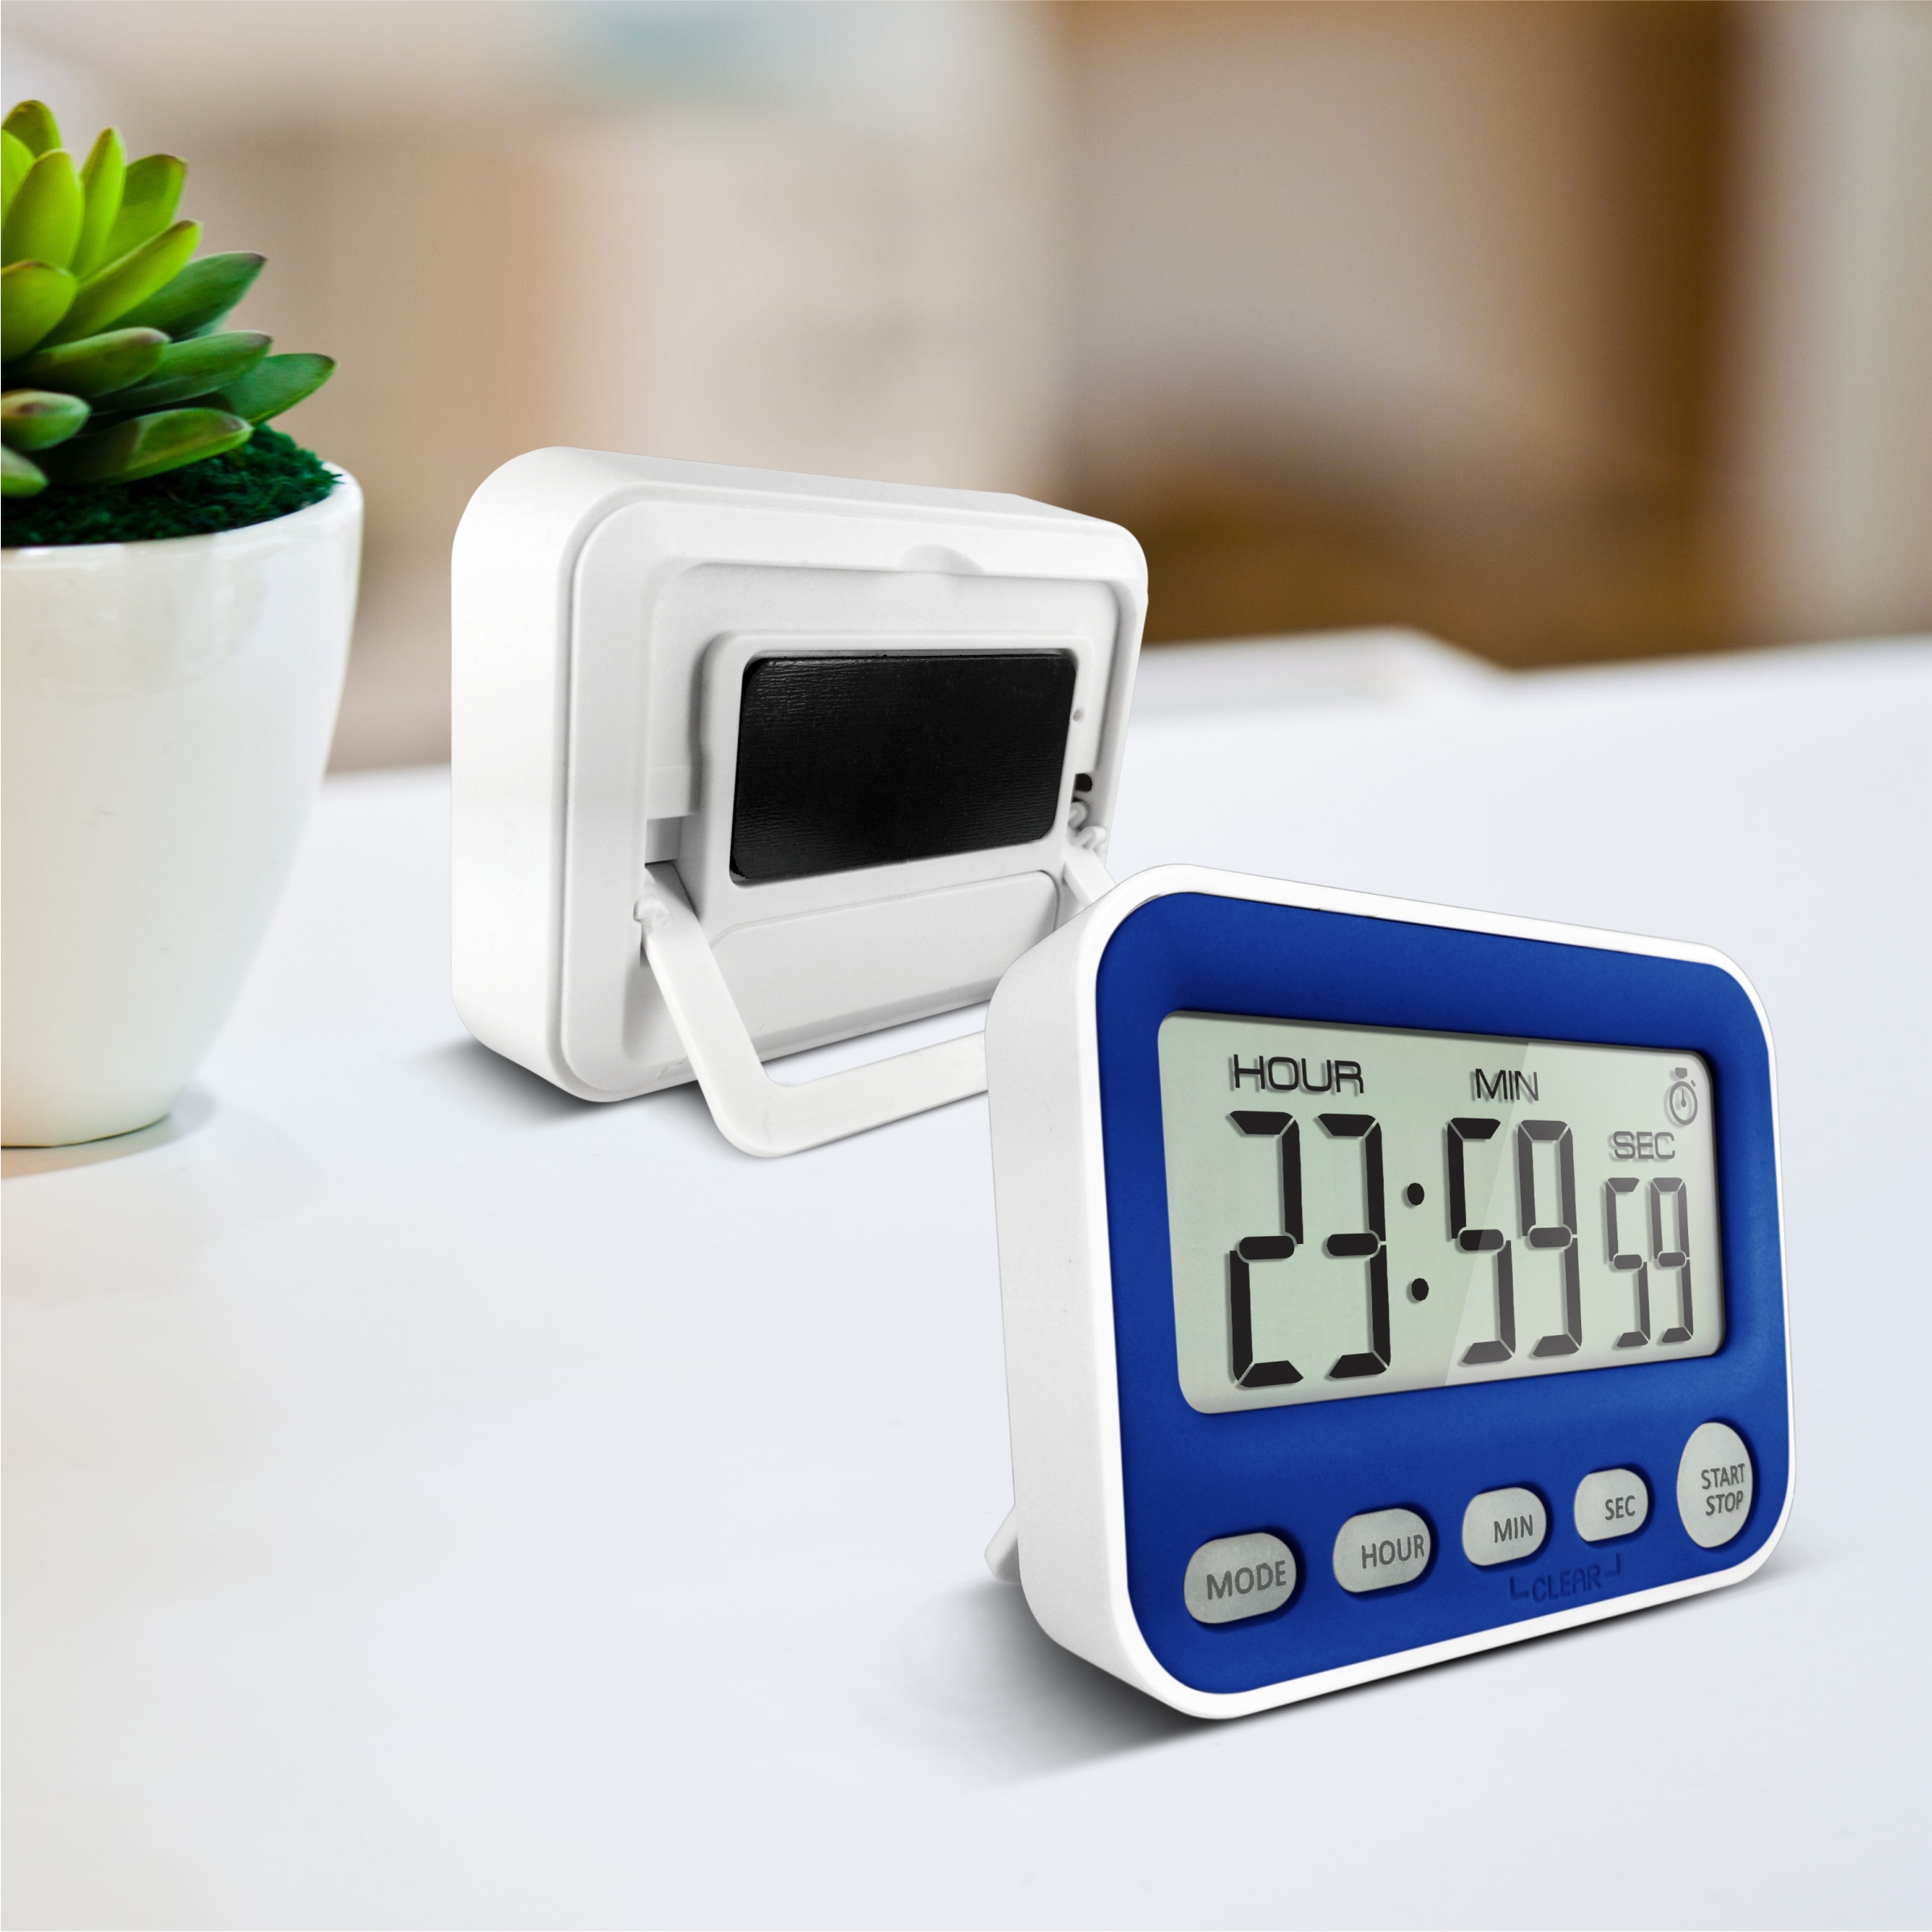 CR-321 Jumbo Display Timer with Clock - Click Image to Close